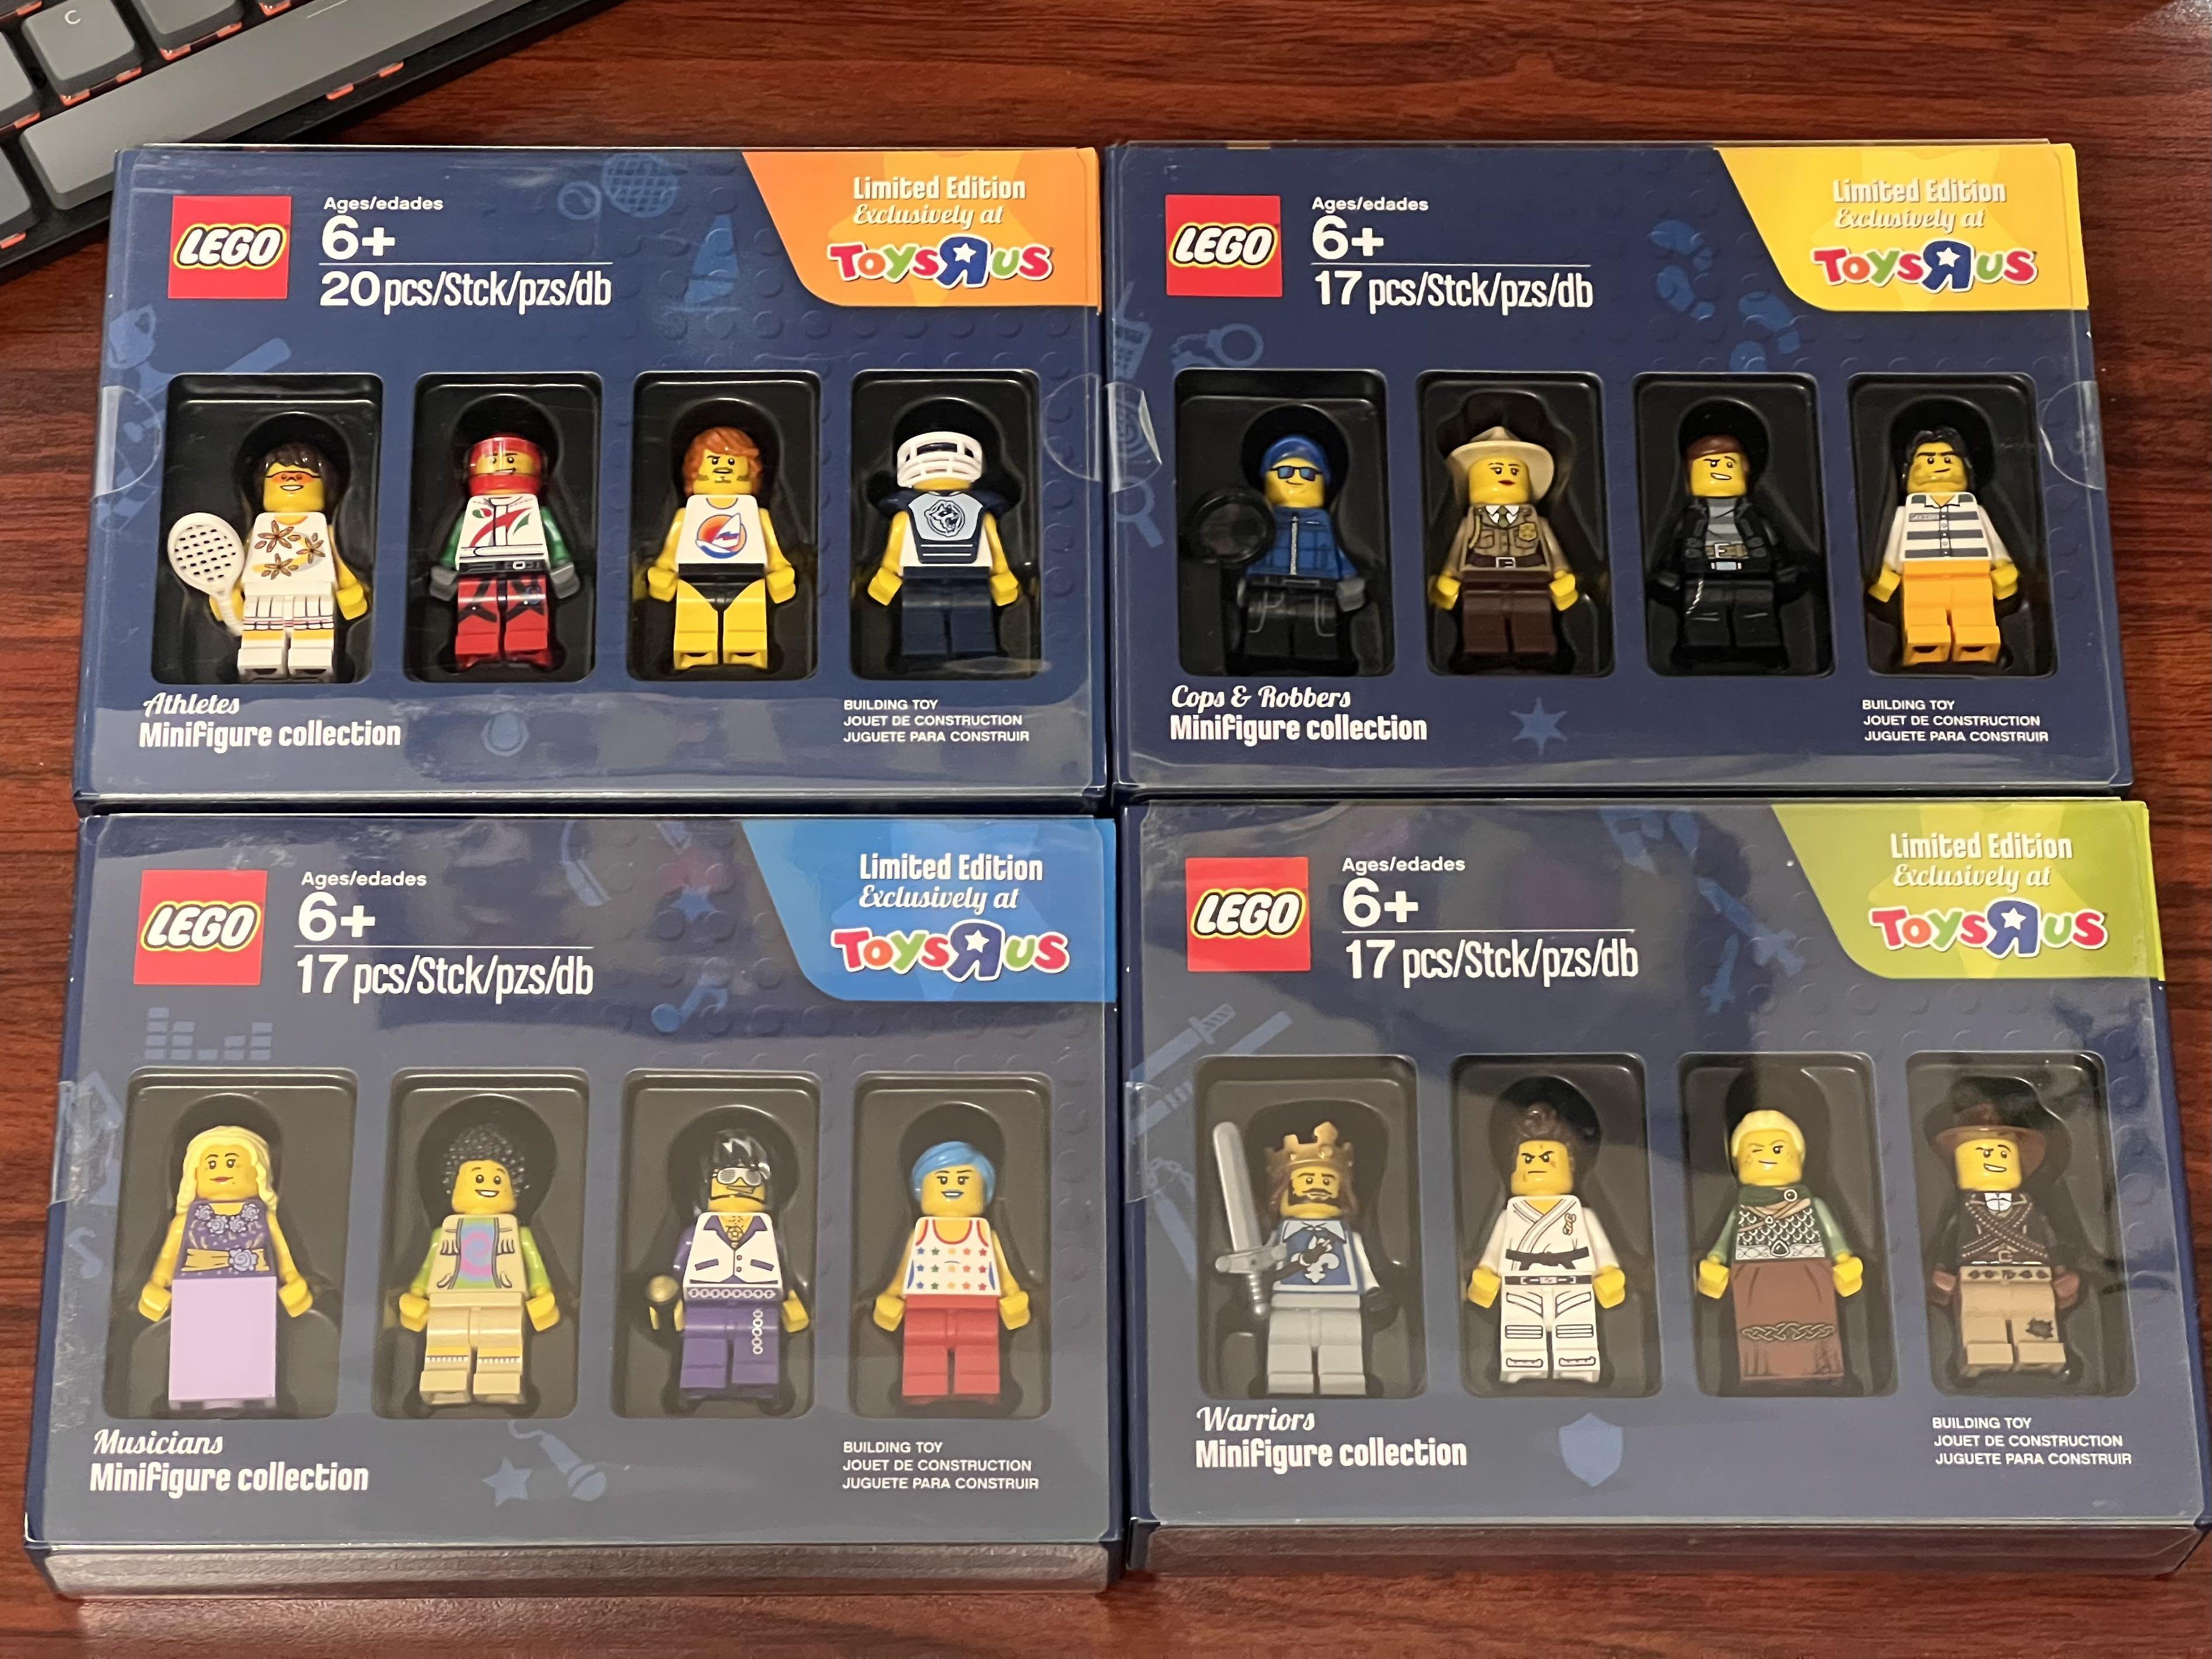 Lego Warriors Minifigure Collection Toys R Us Exclusive 2016 